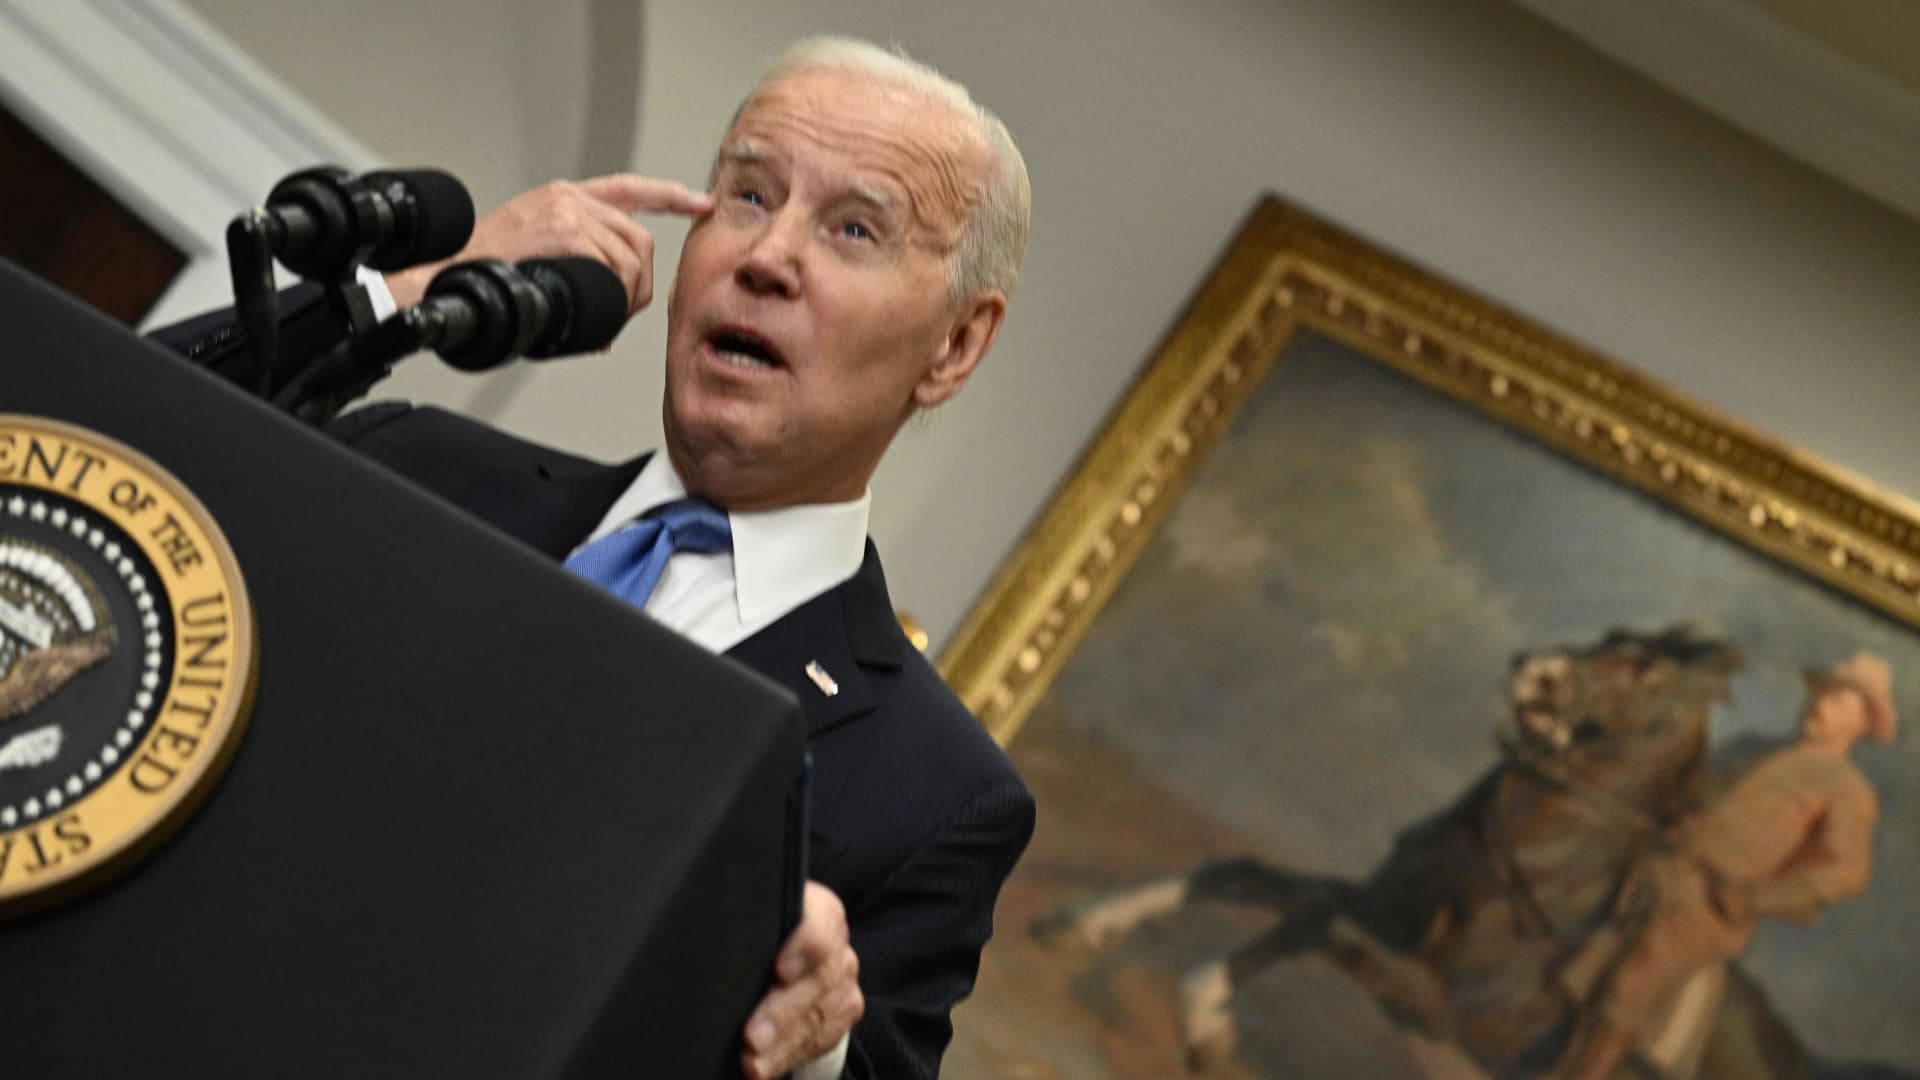 US President Joe Biden speaks about the ongoing federal response efforts for Hurricane Ian in the Roosevelt Room of the White House in Washington, DC, on September 30, 2022.